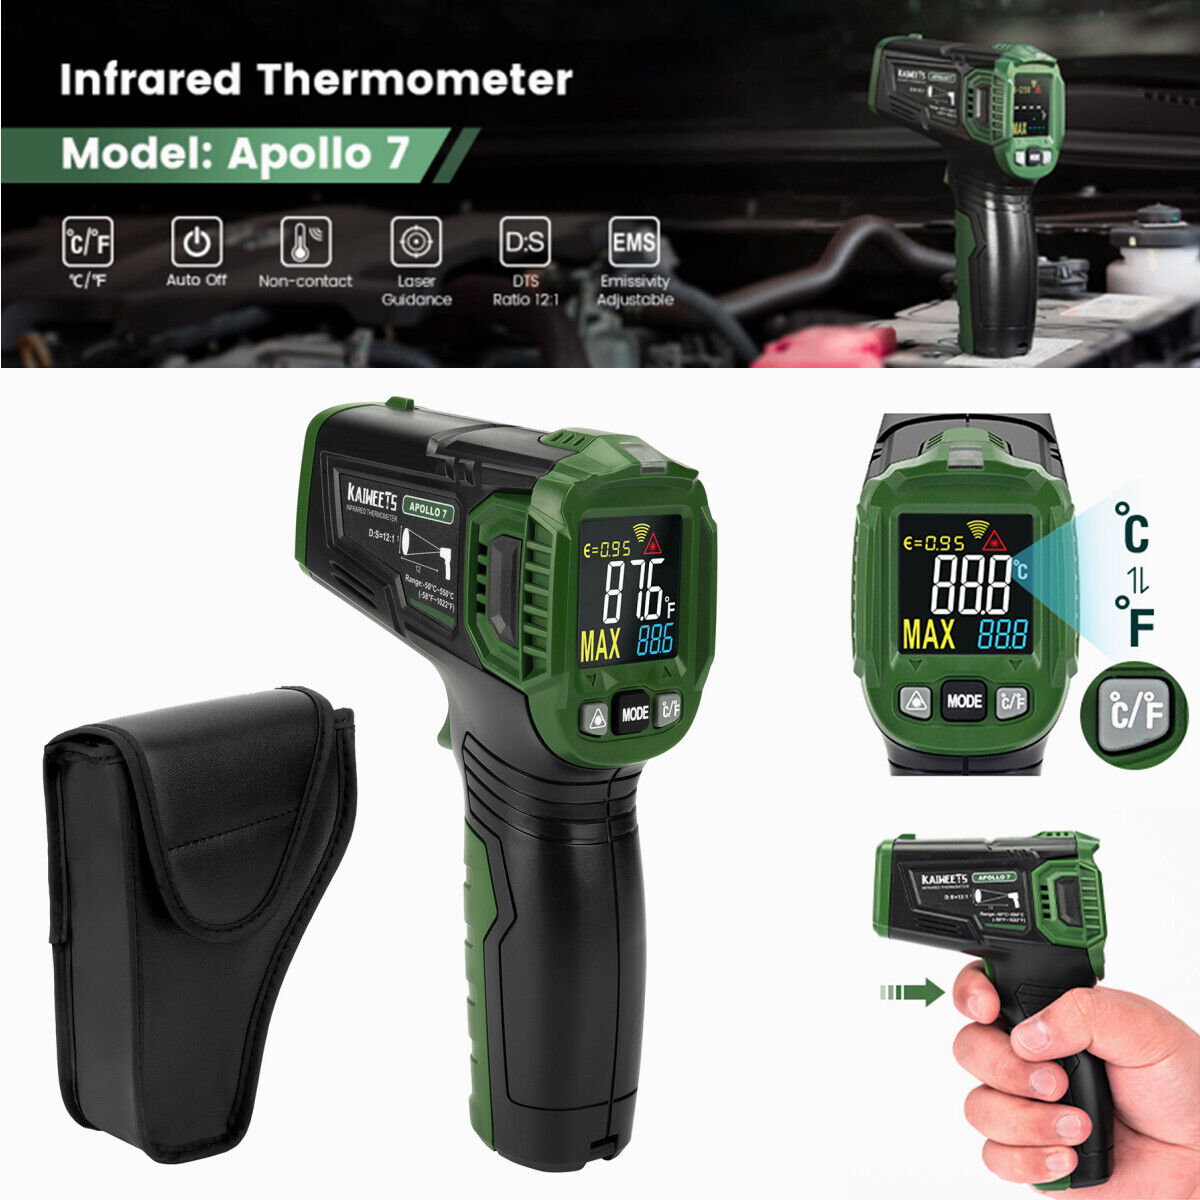 Infrared thermometer for industry & business